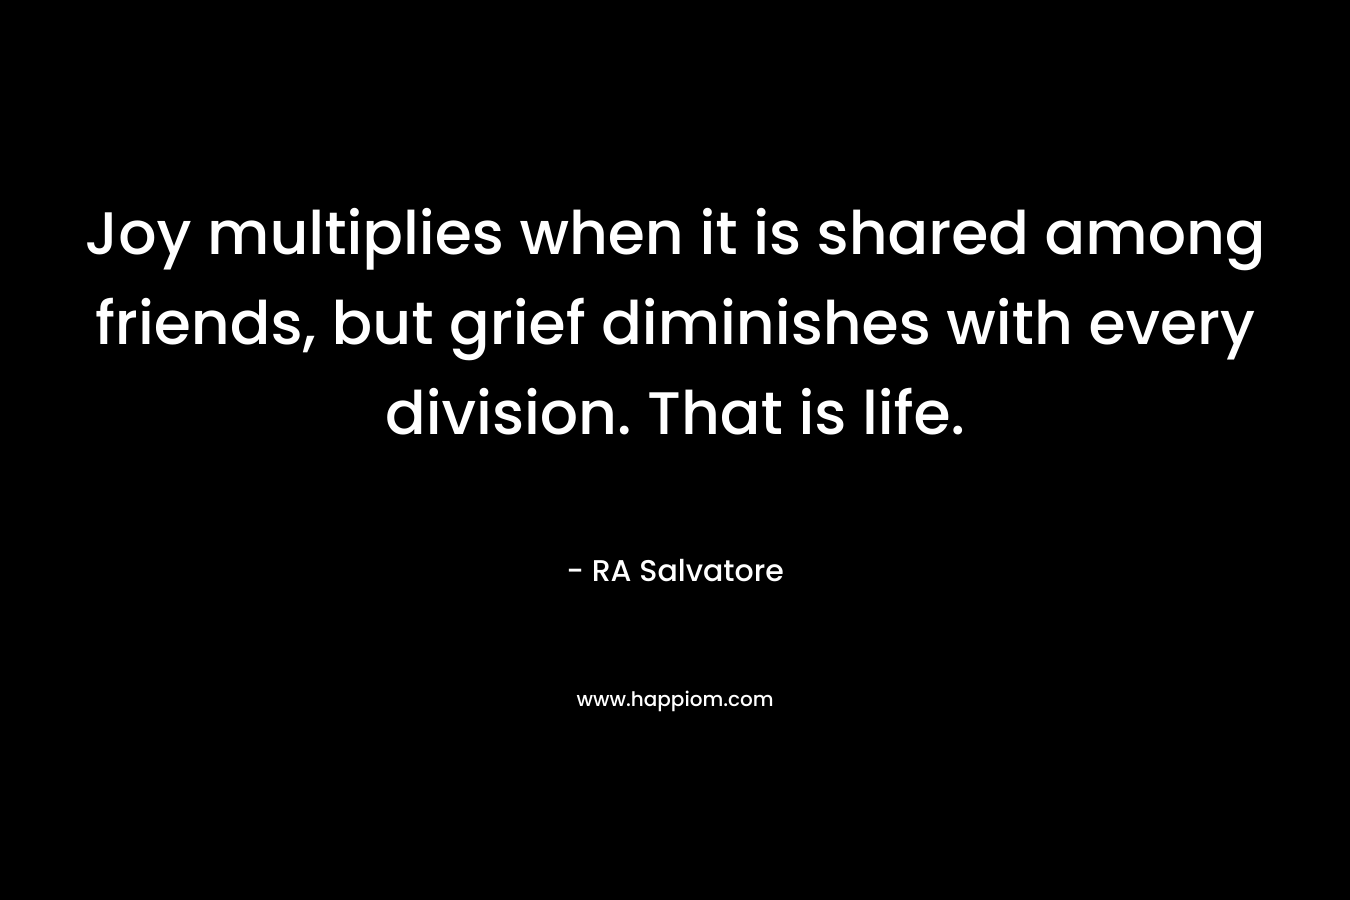 Joy multiplies when it is shared among friends, but grief diminishes with every division. That is life. – RA Salvatore